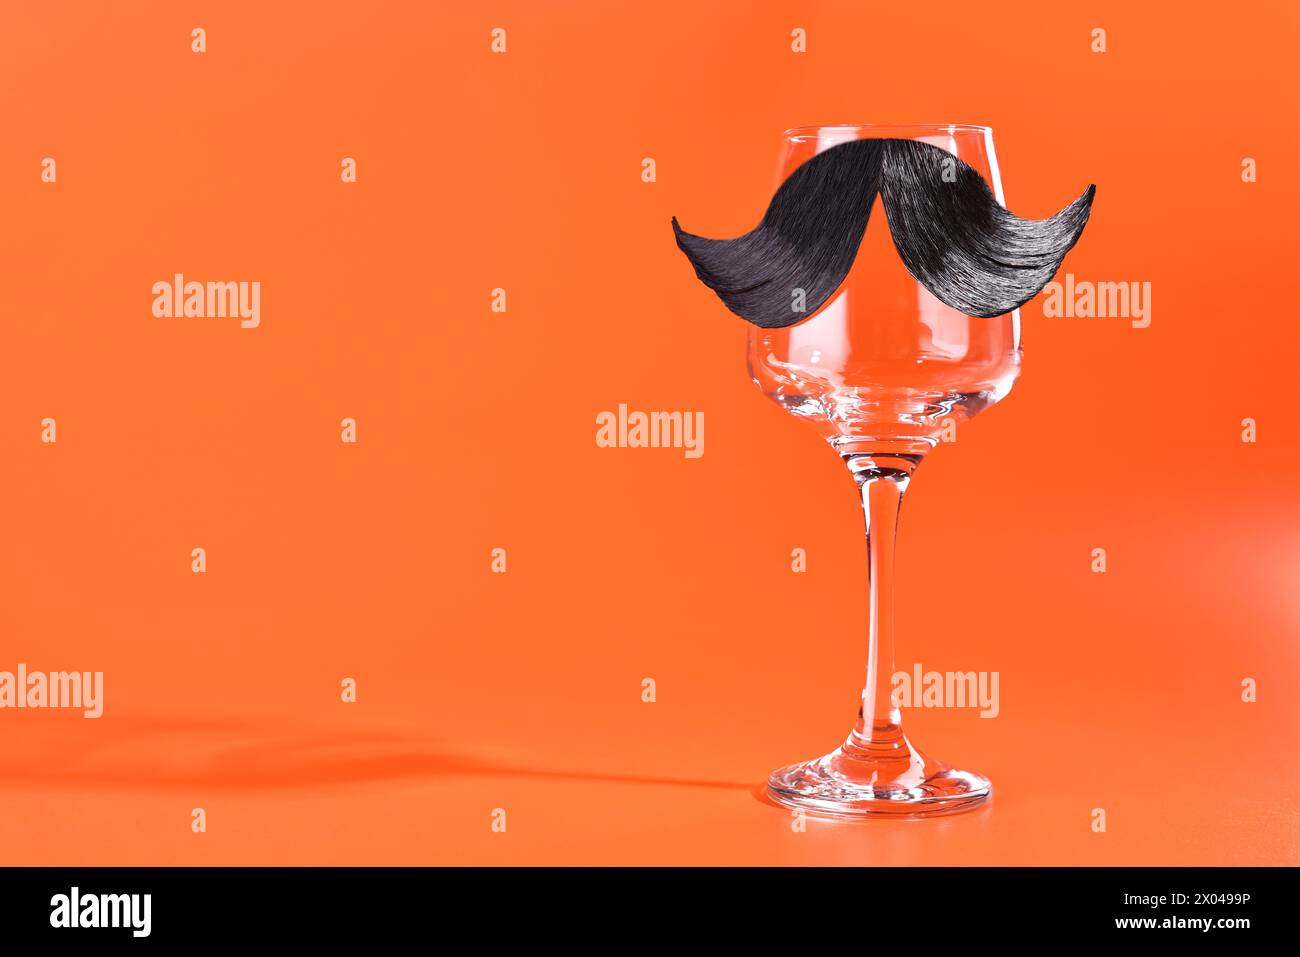 Man's face made of artificial mustache and wine glass on orange background. Space for text Stock Photo